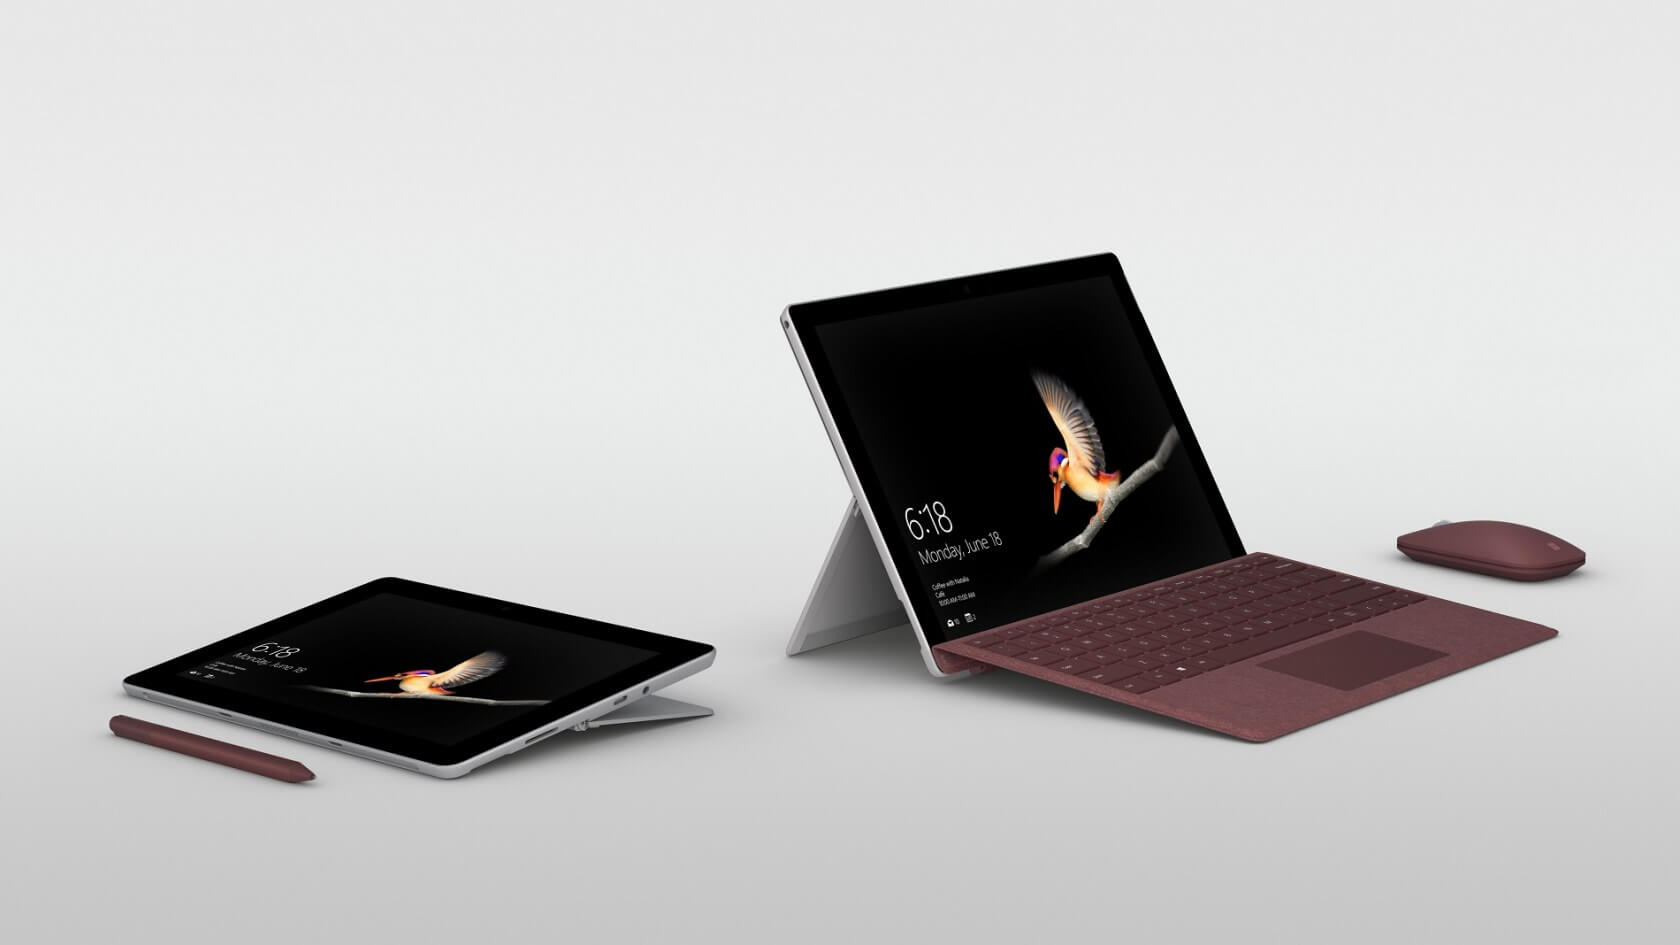 Microsoft reveals the $399 Surface Go